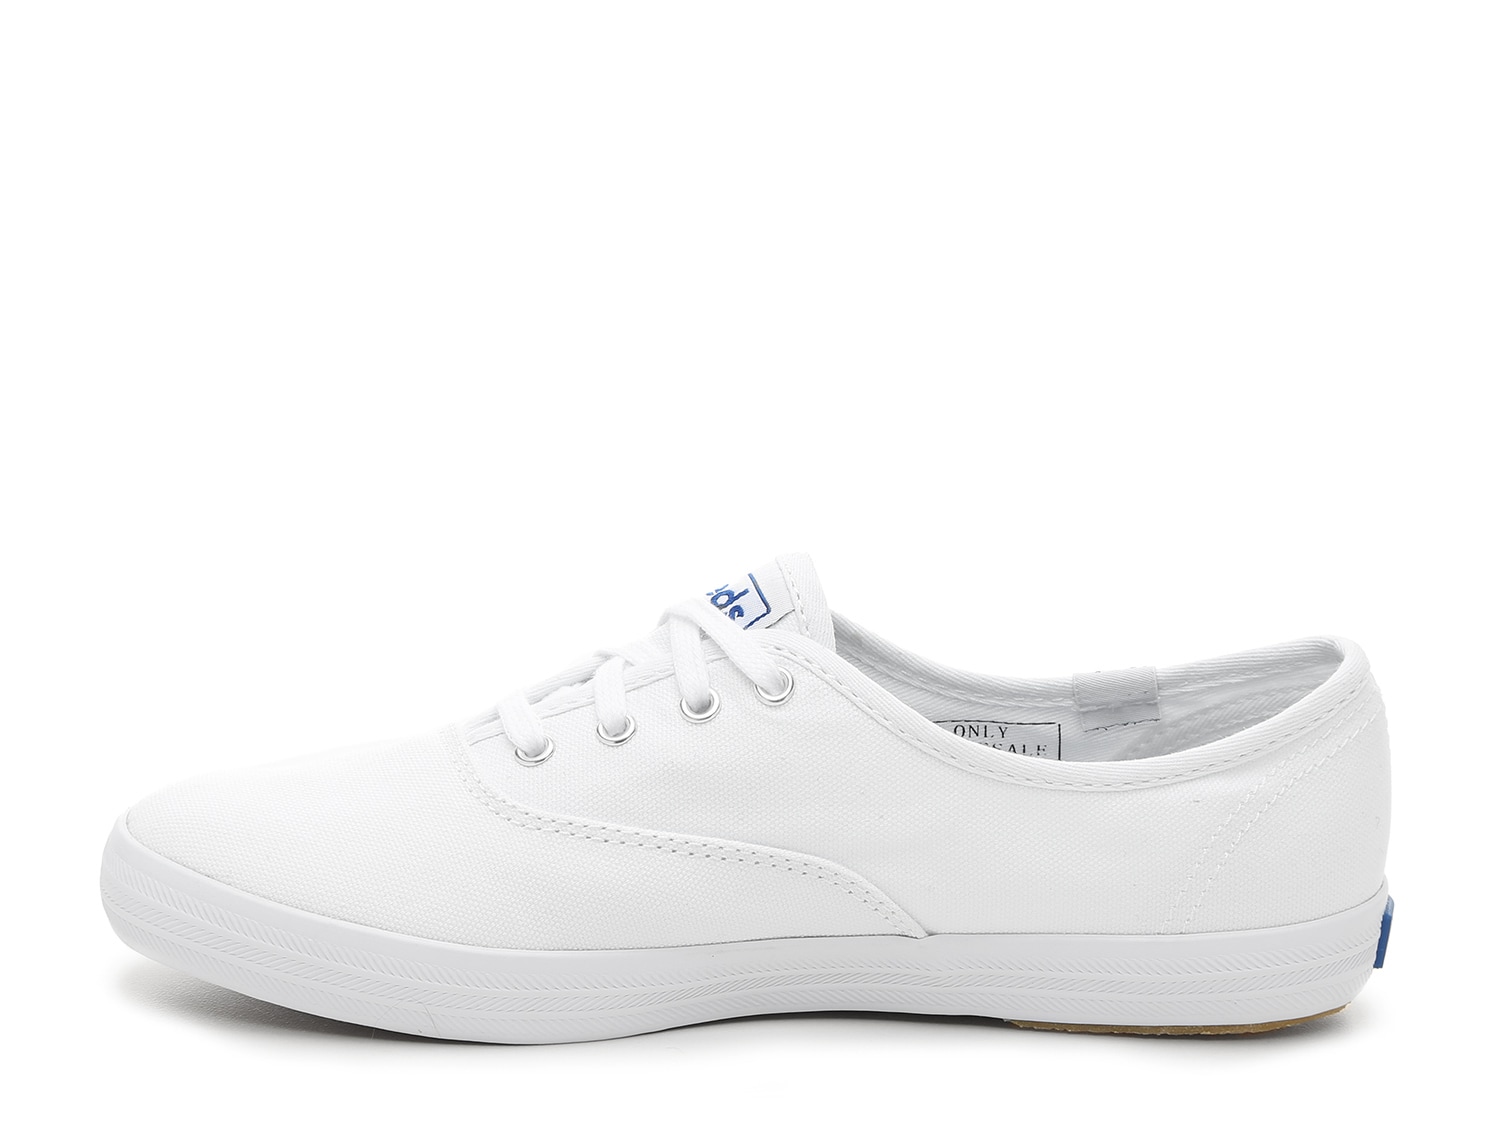 dsw white tennis shoes